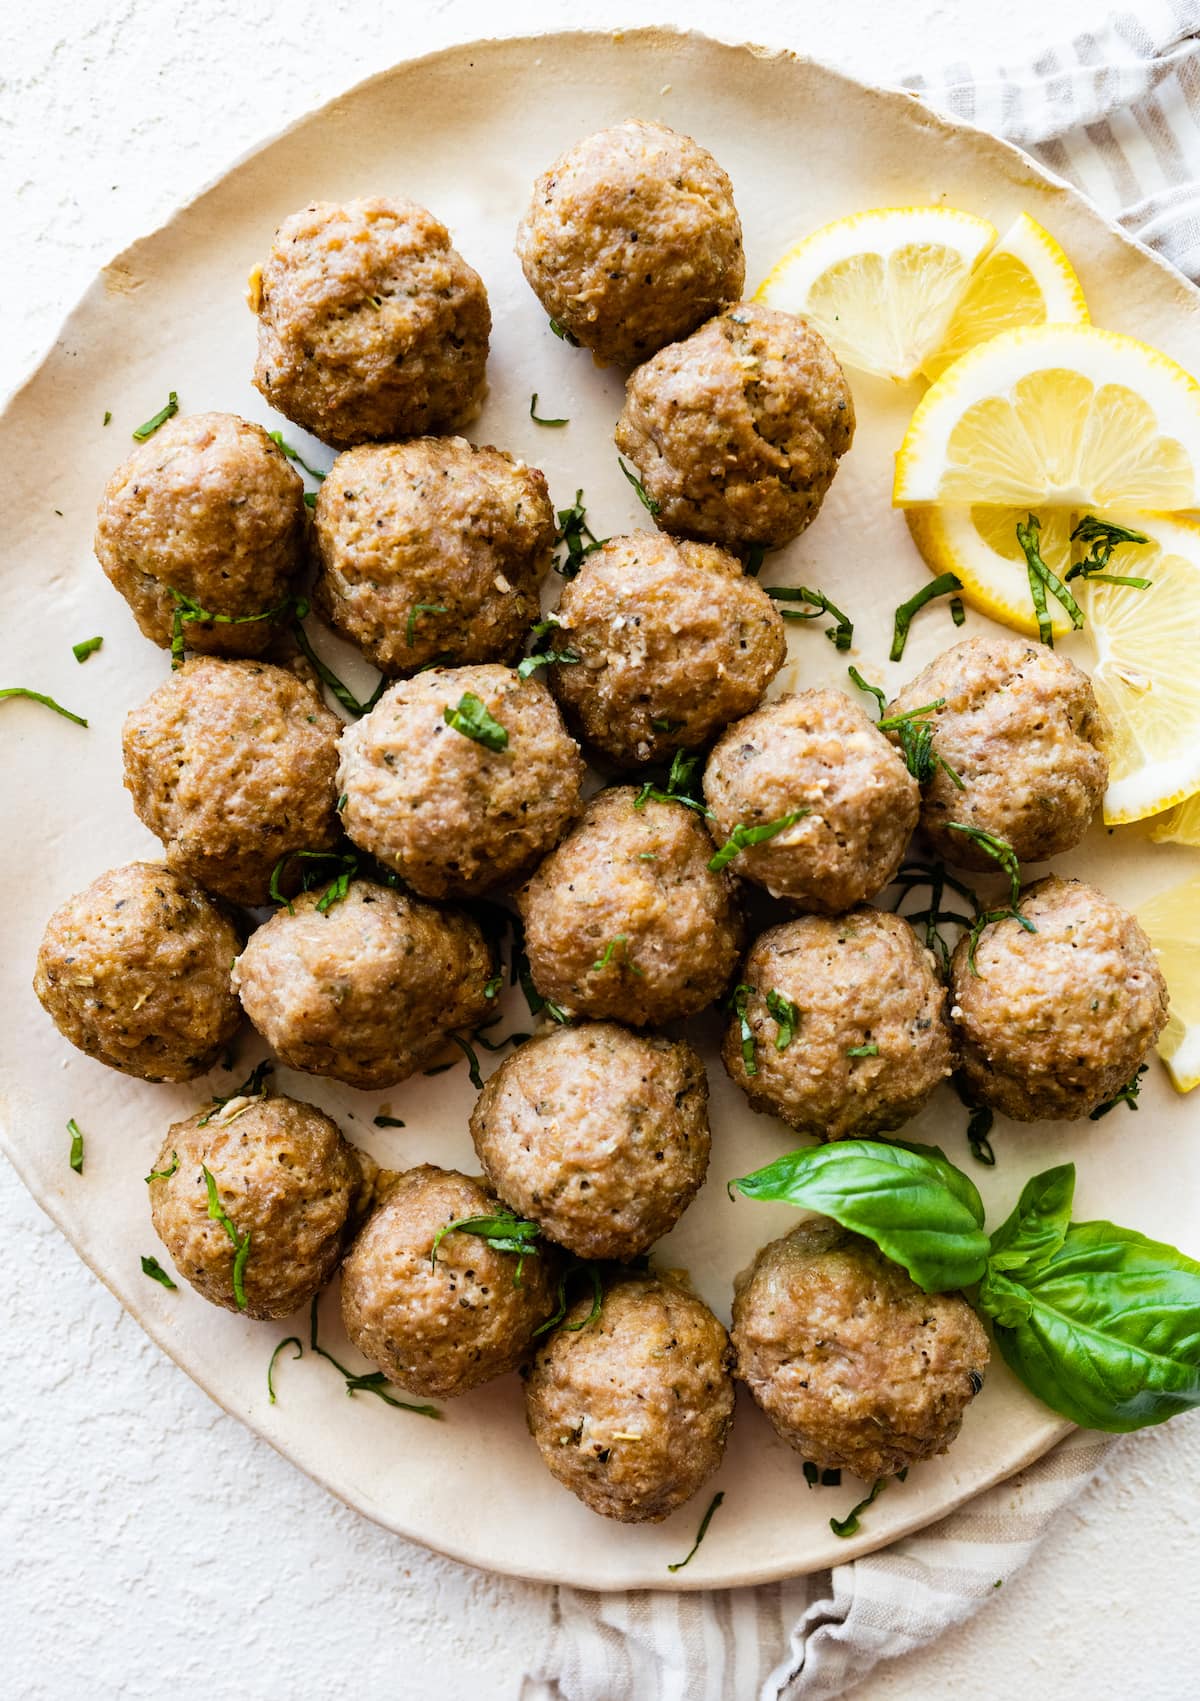 Baked turkey meatballs on a plate with fresh basil and lemon slices.